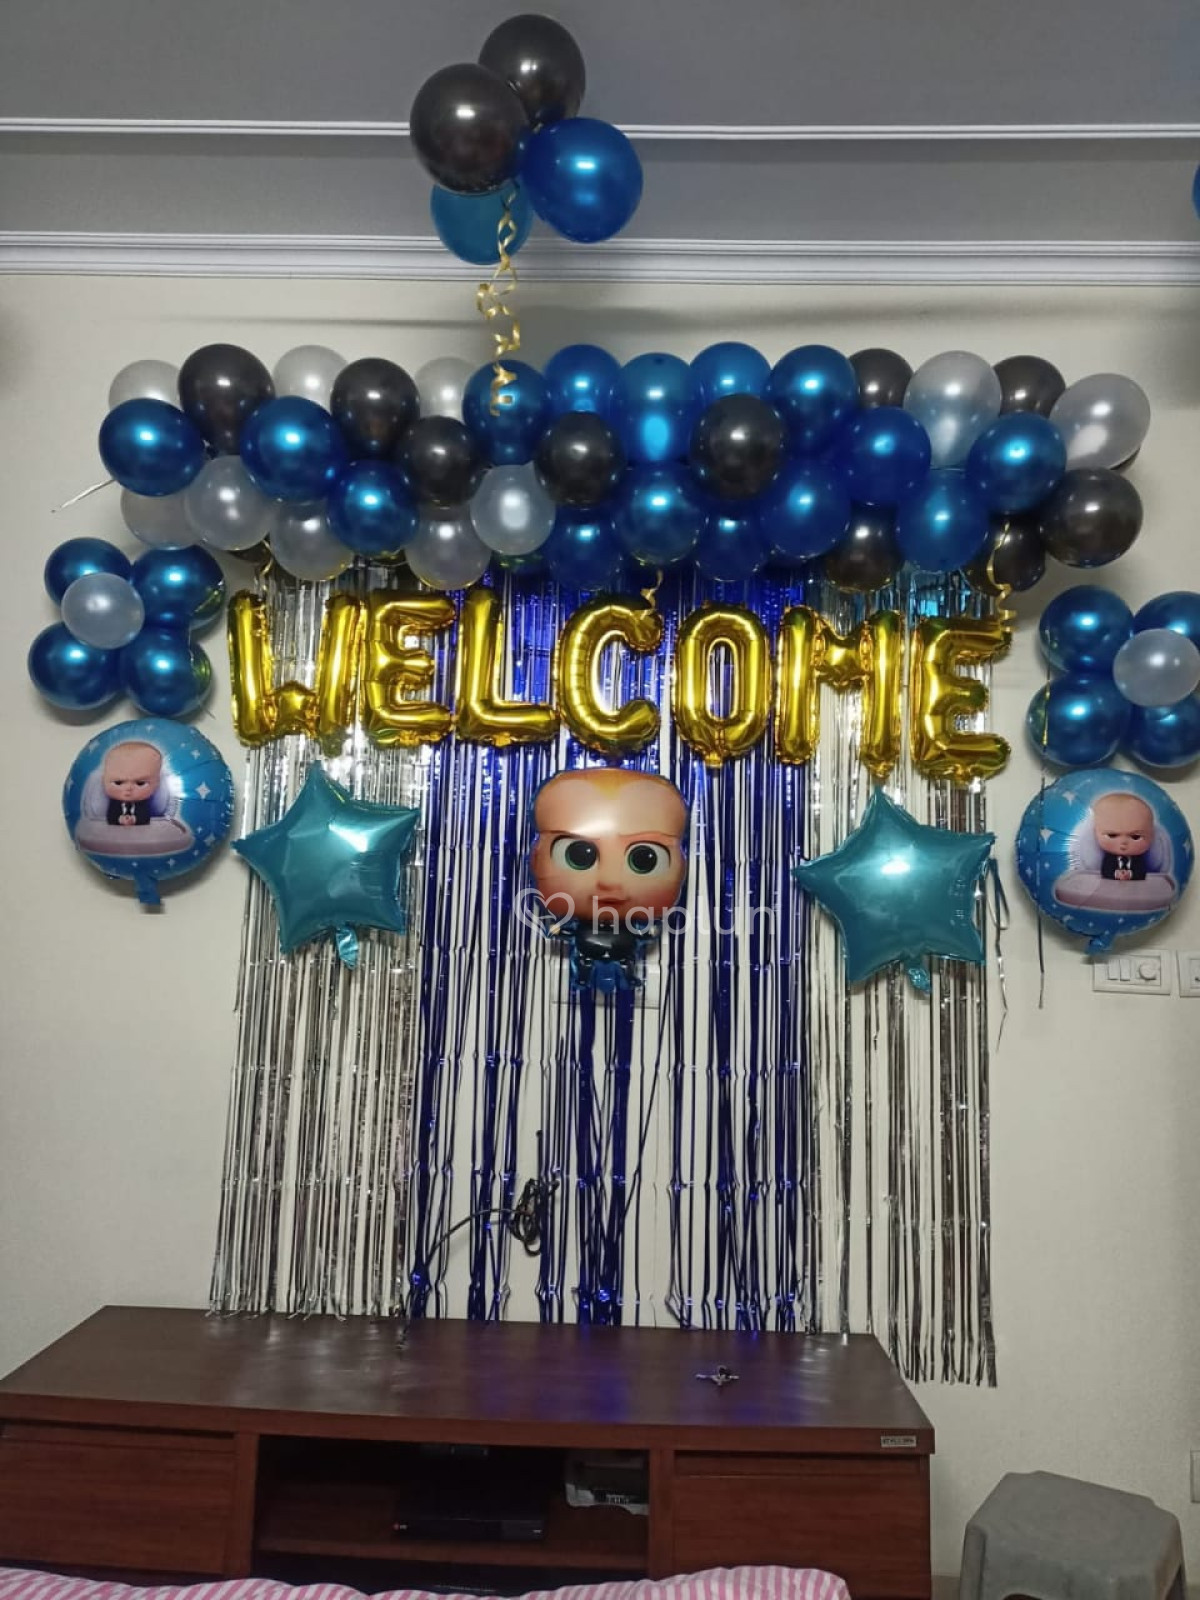 welcome home baby boy party ideas